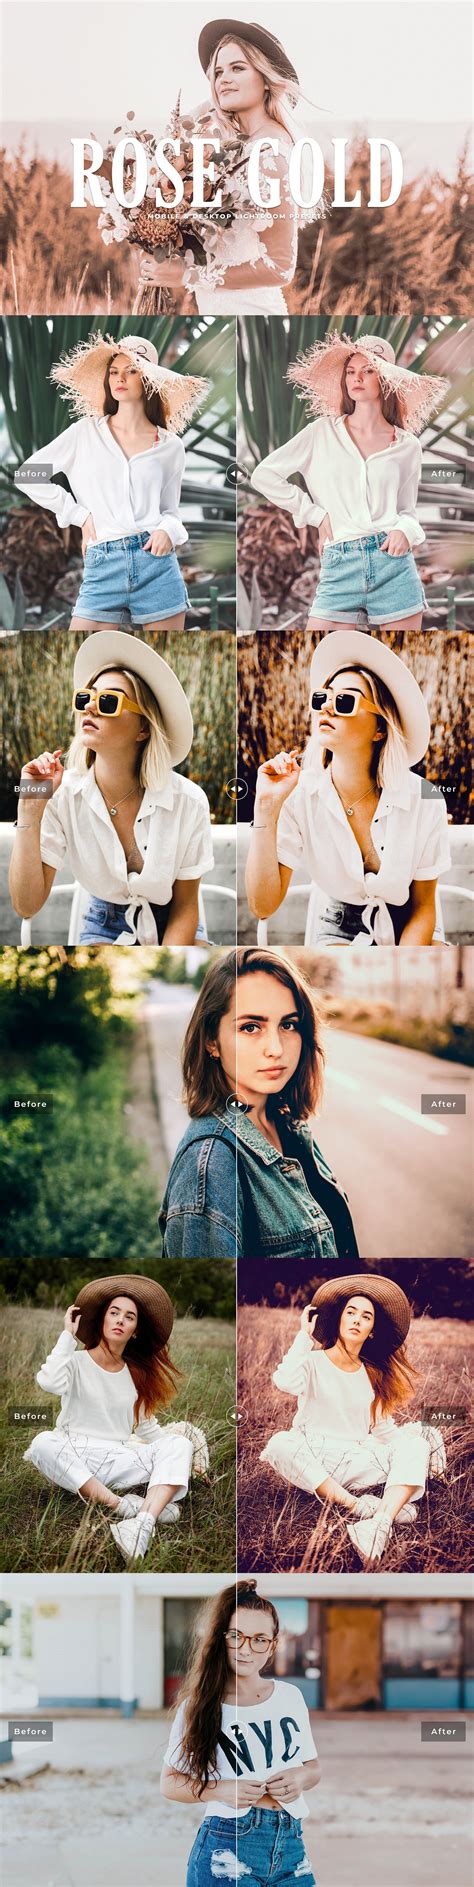 Lightroom presets are a great way to speed up photo editing. Rose Gold Lightroom Presets | Lightroom presets, Lightroom ...